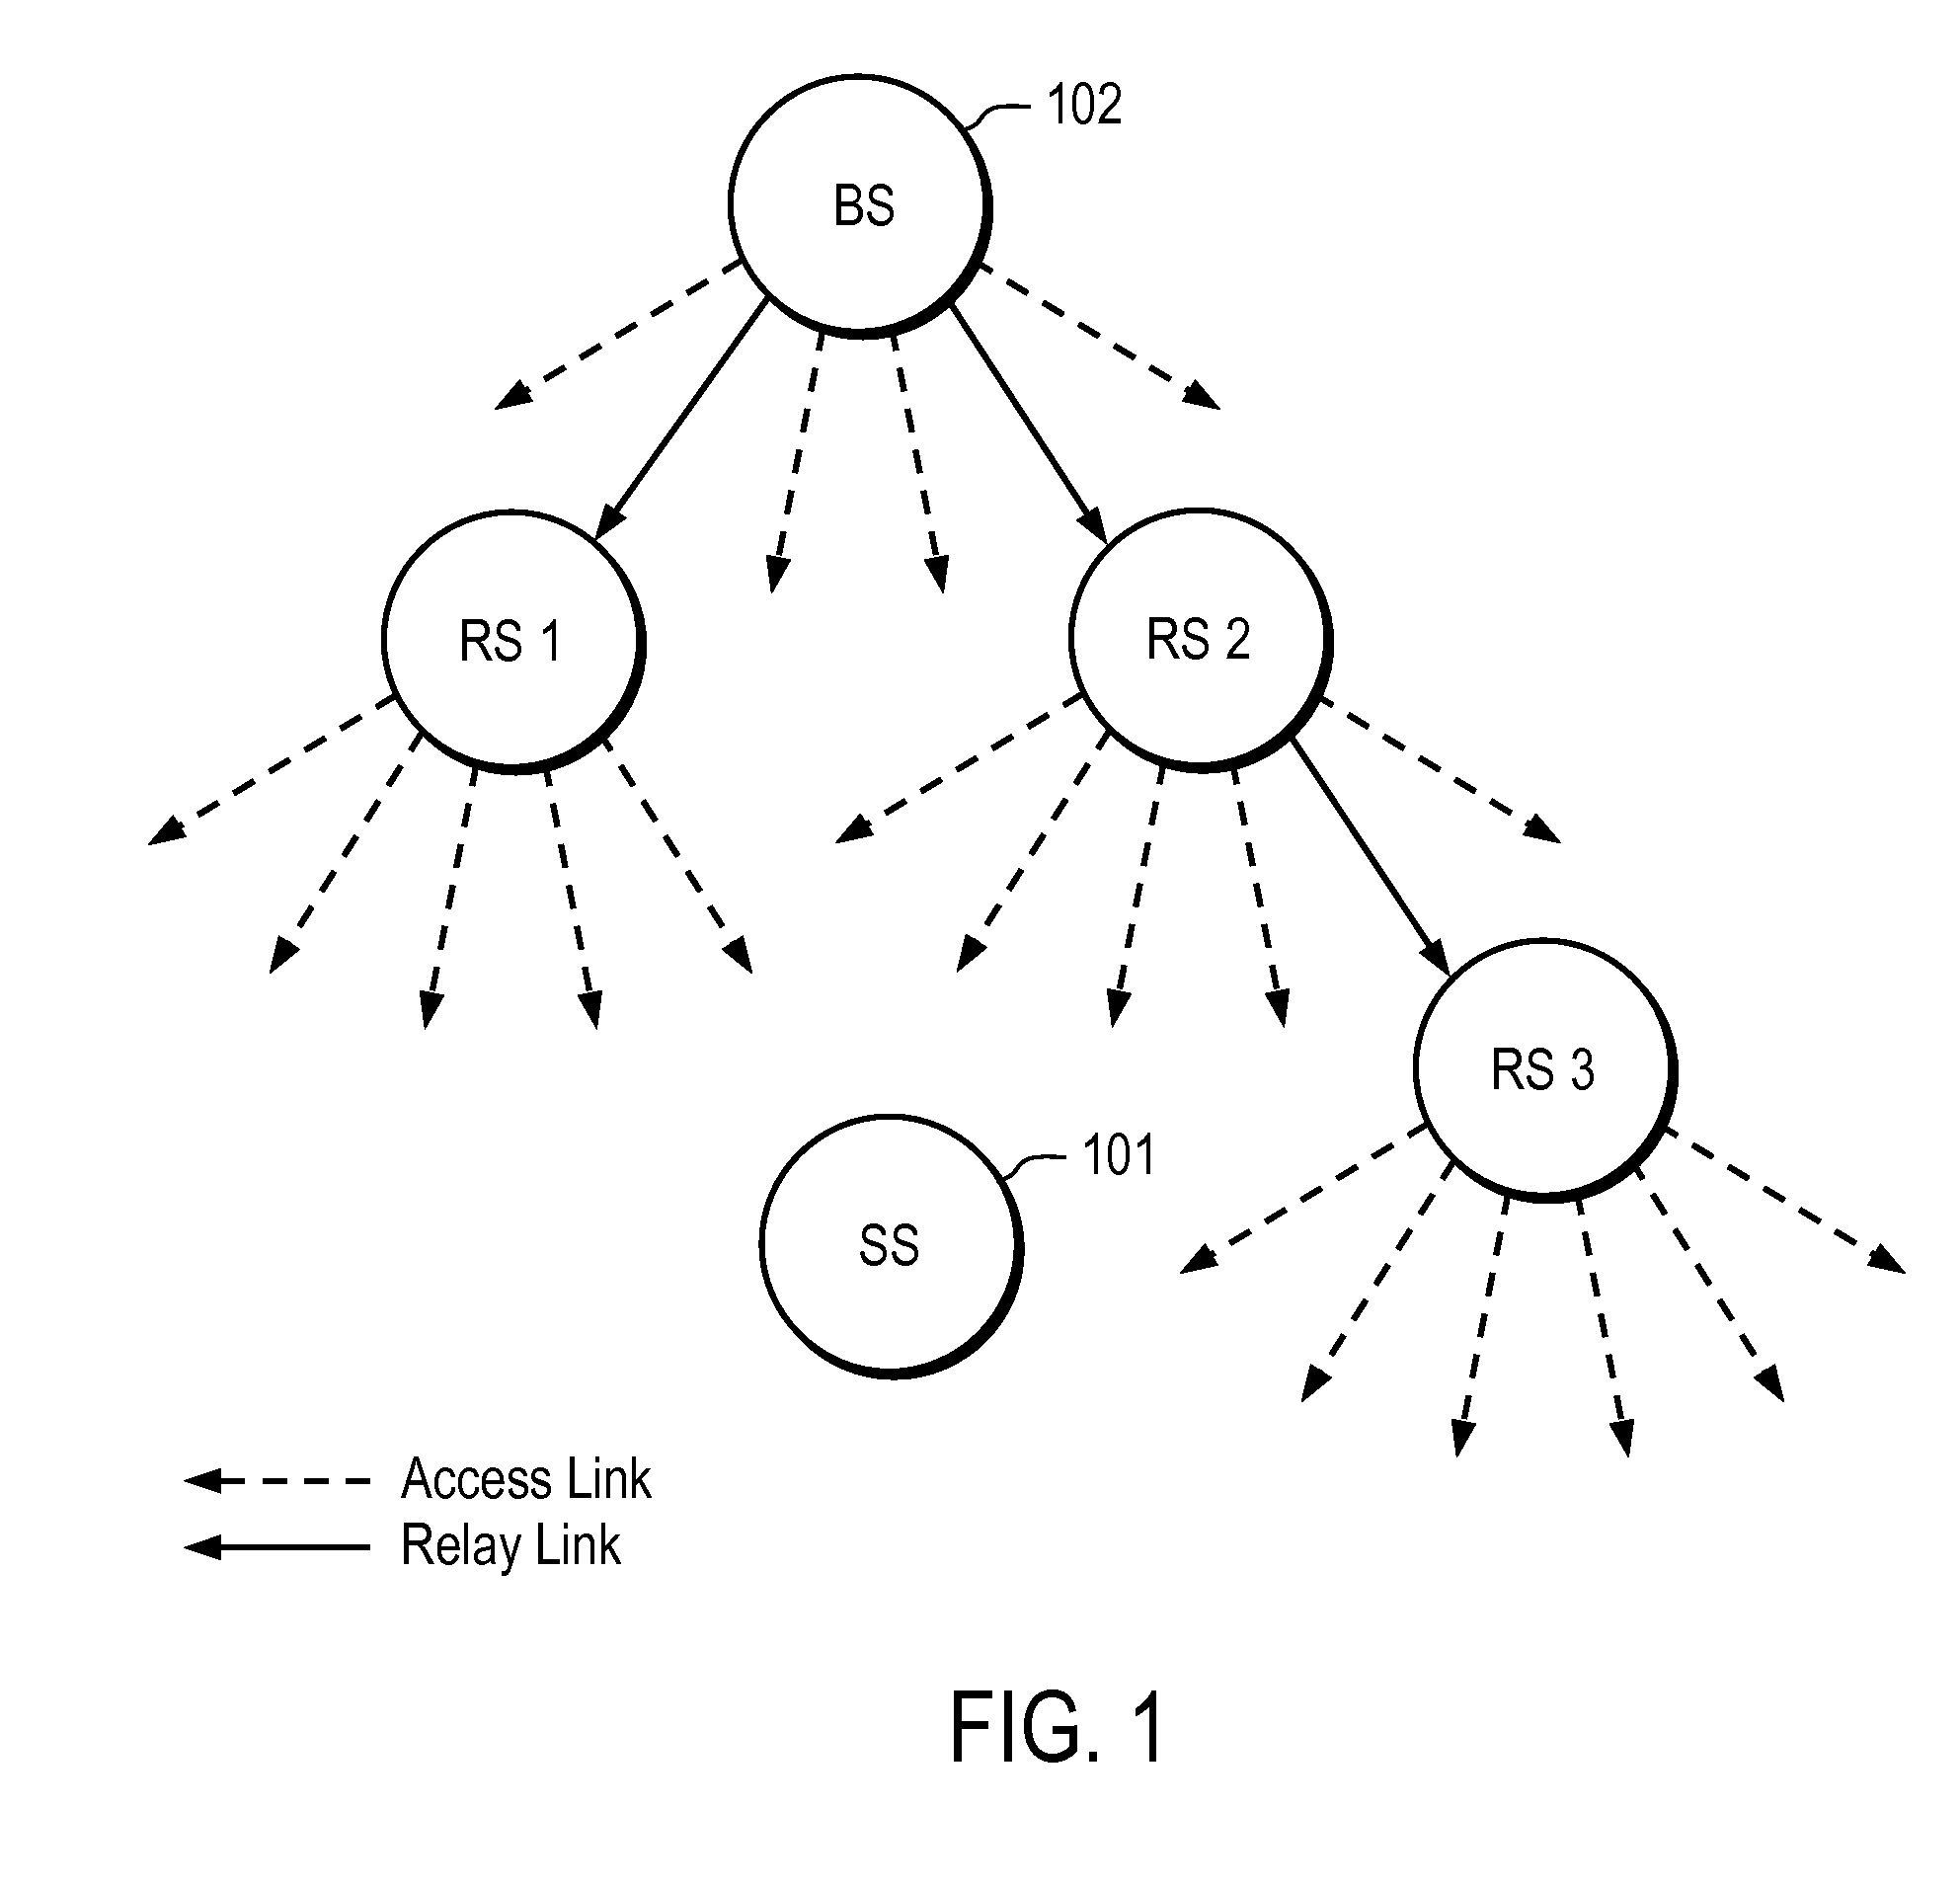 Synchronized multi-link transmission in an arq-enabled multi-hop wireless network